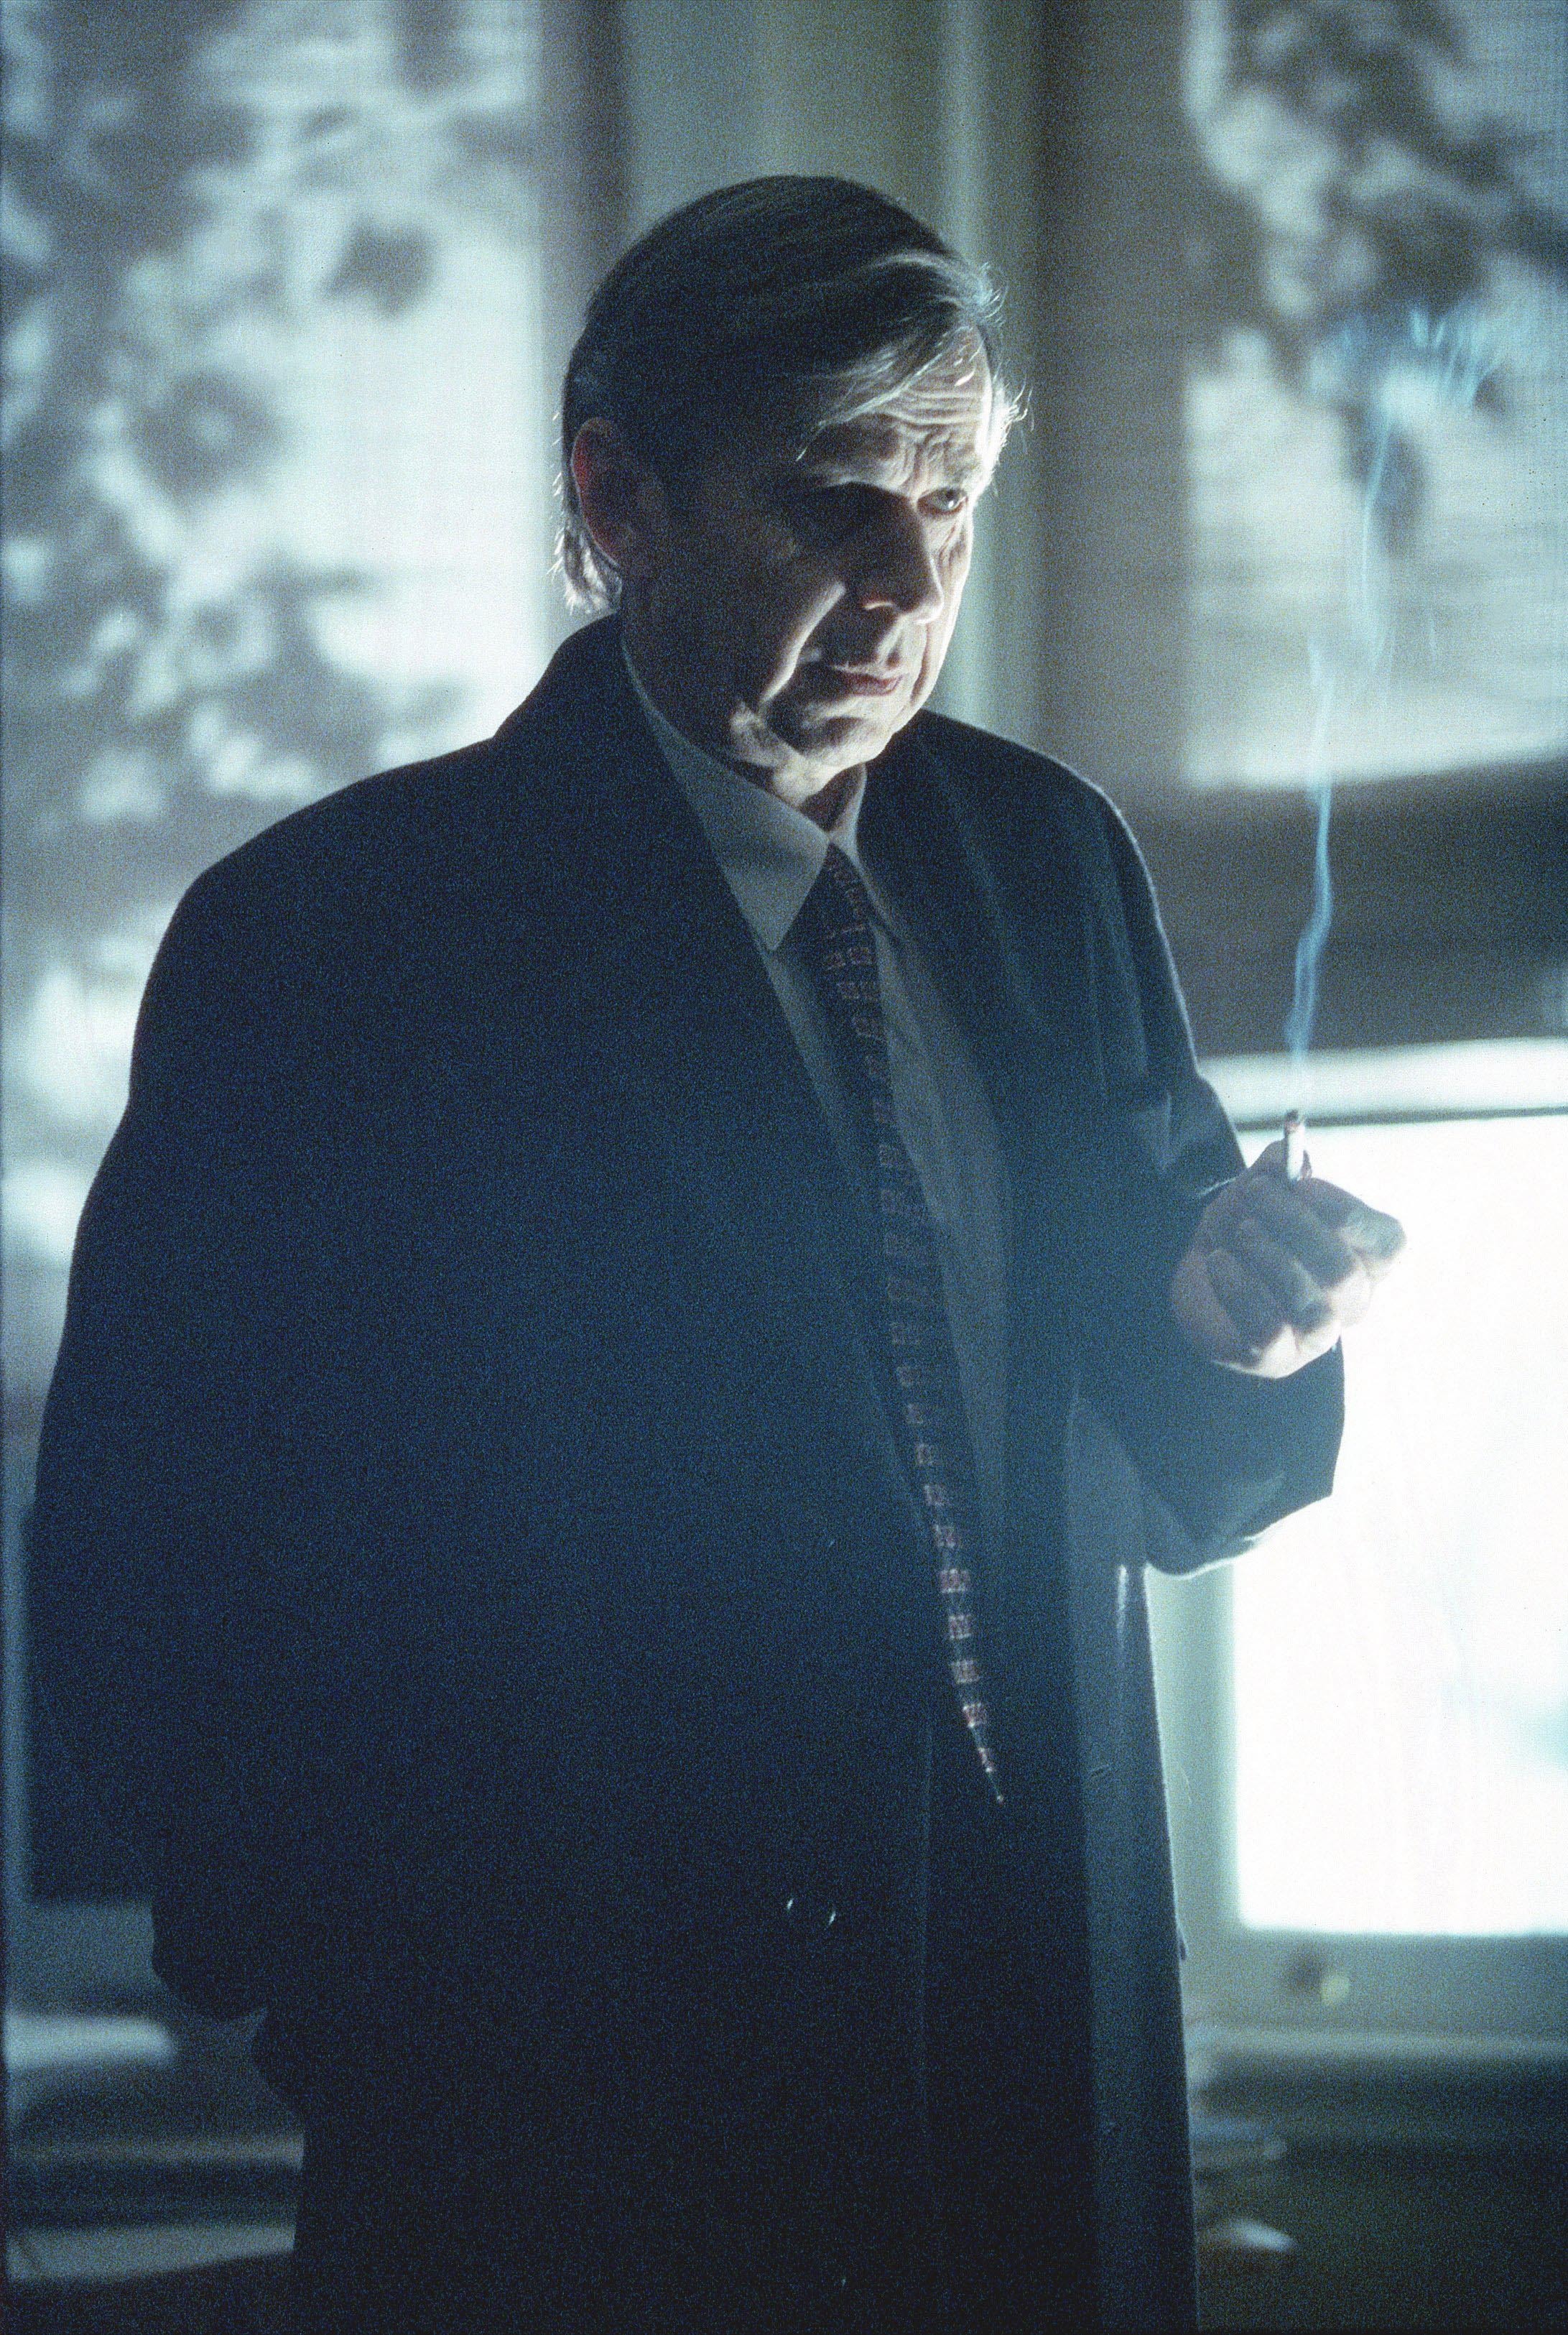 The mysterious Cigarette Smoking Man